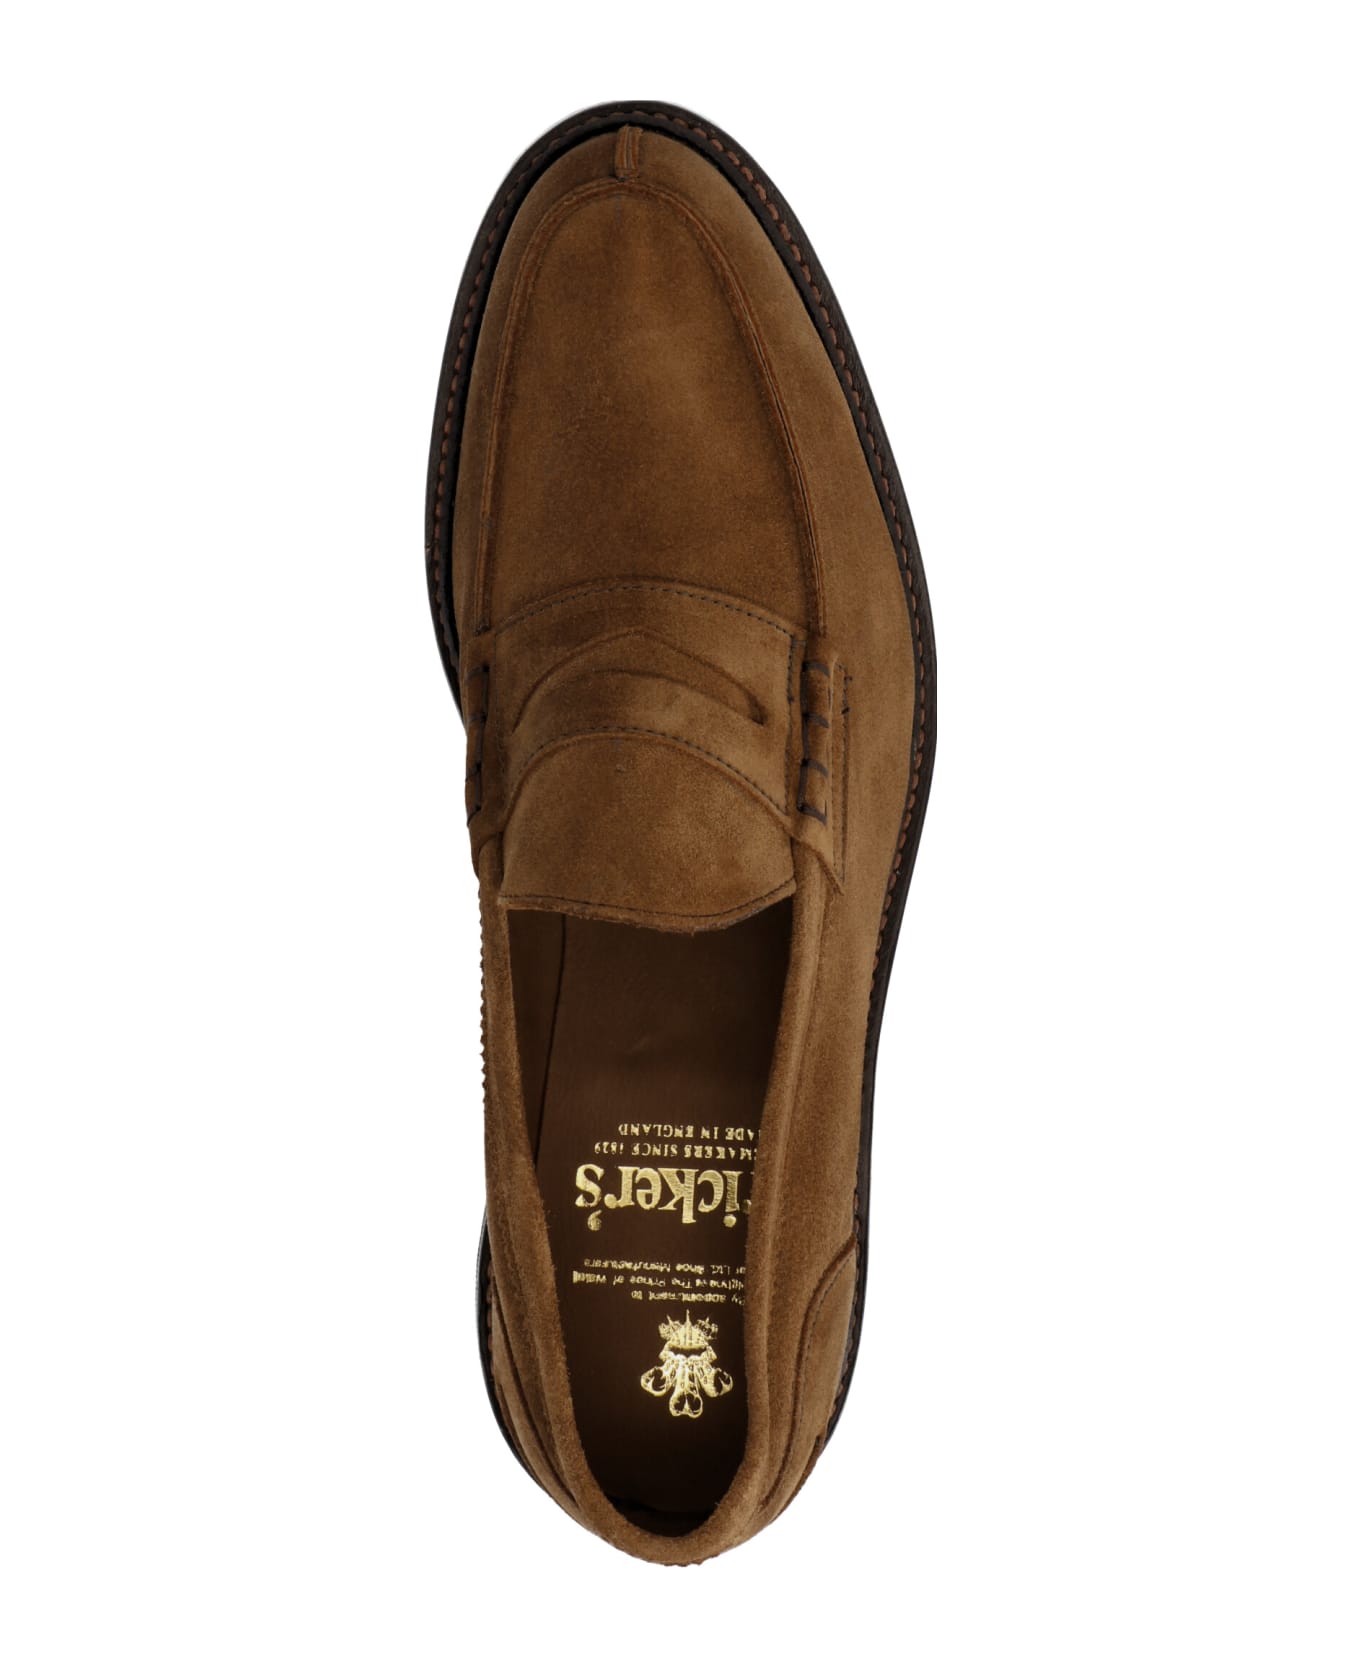 Tricker's 'college  Loafers - Brown